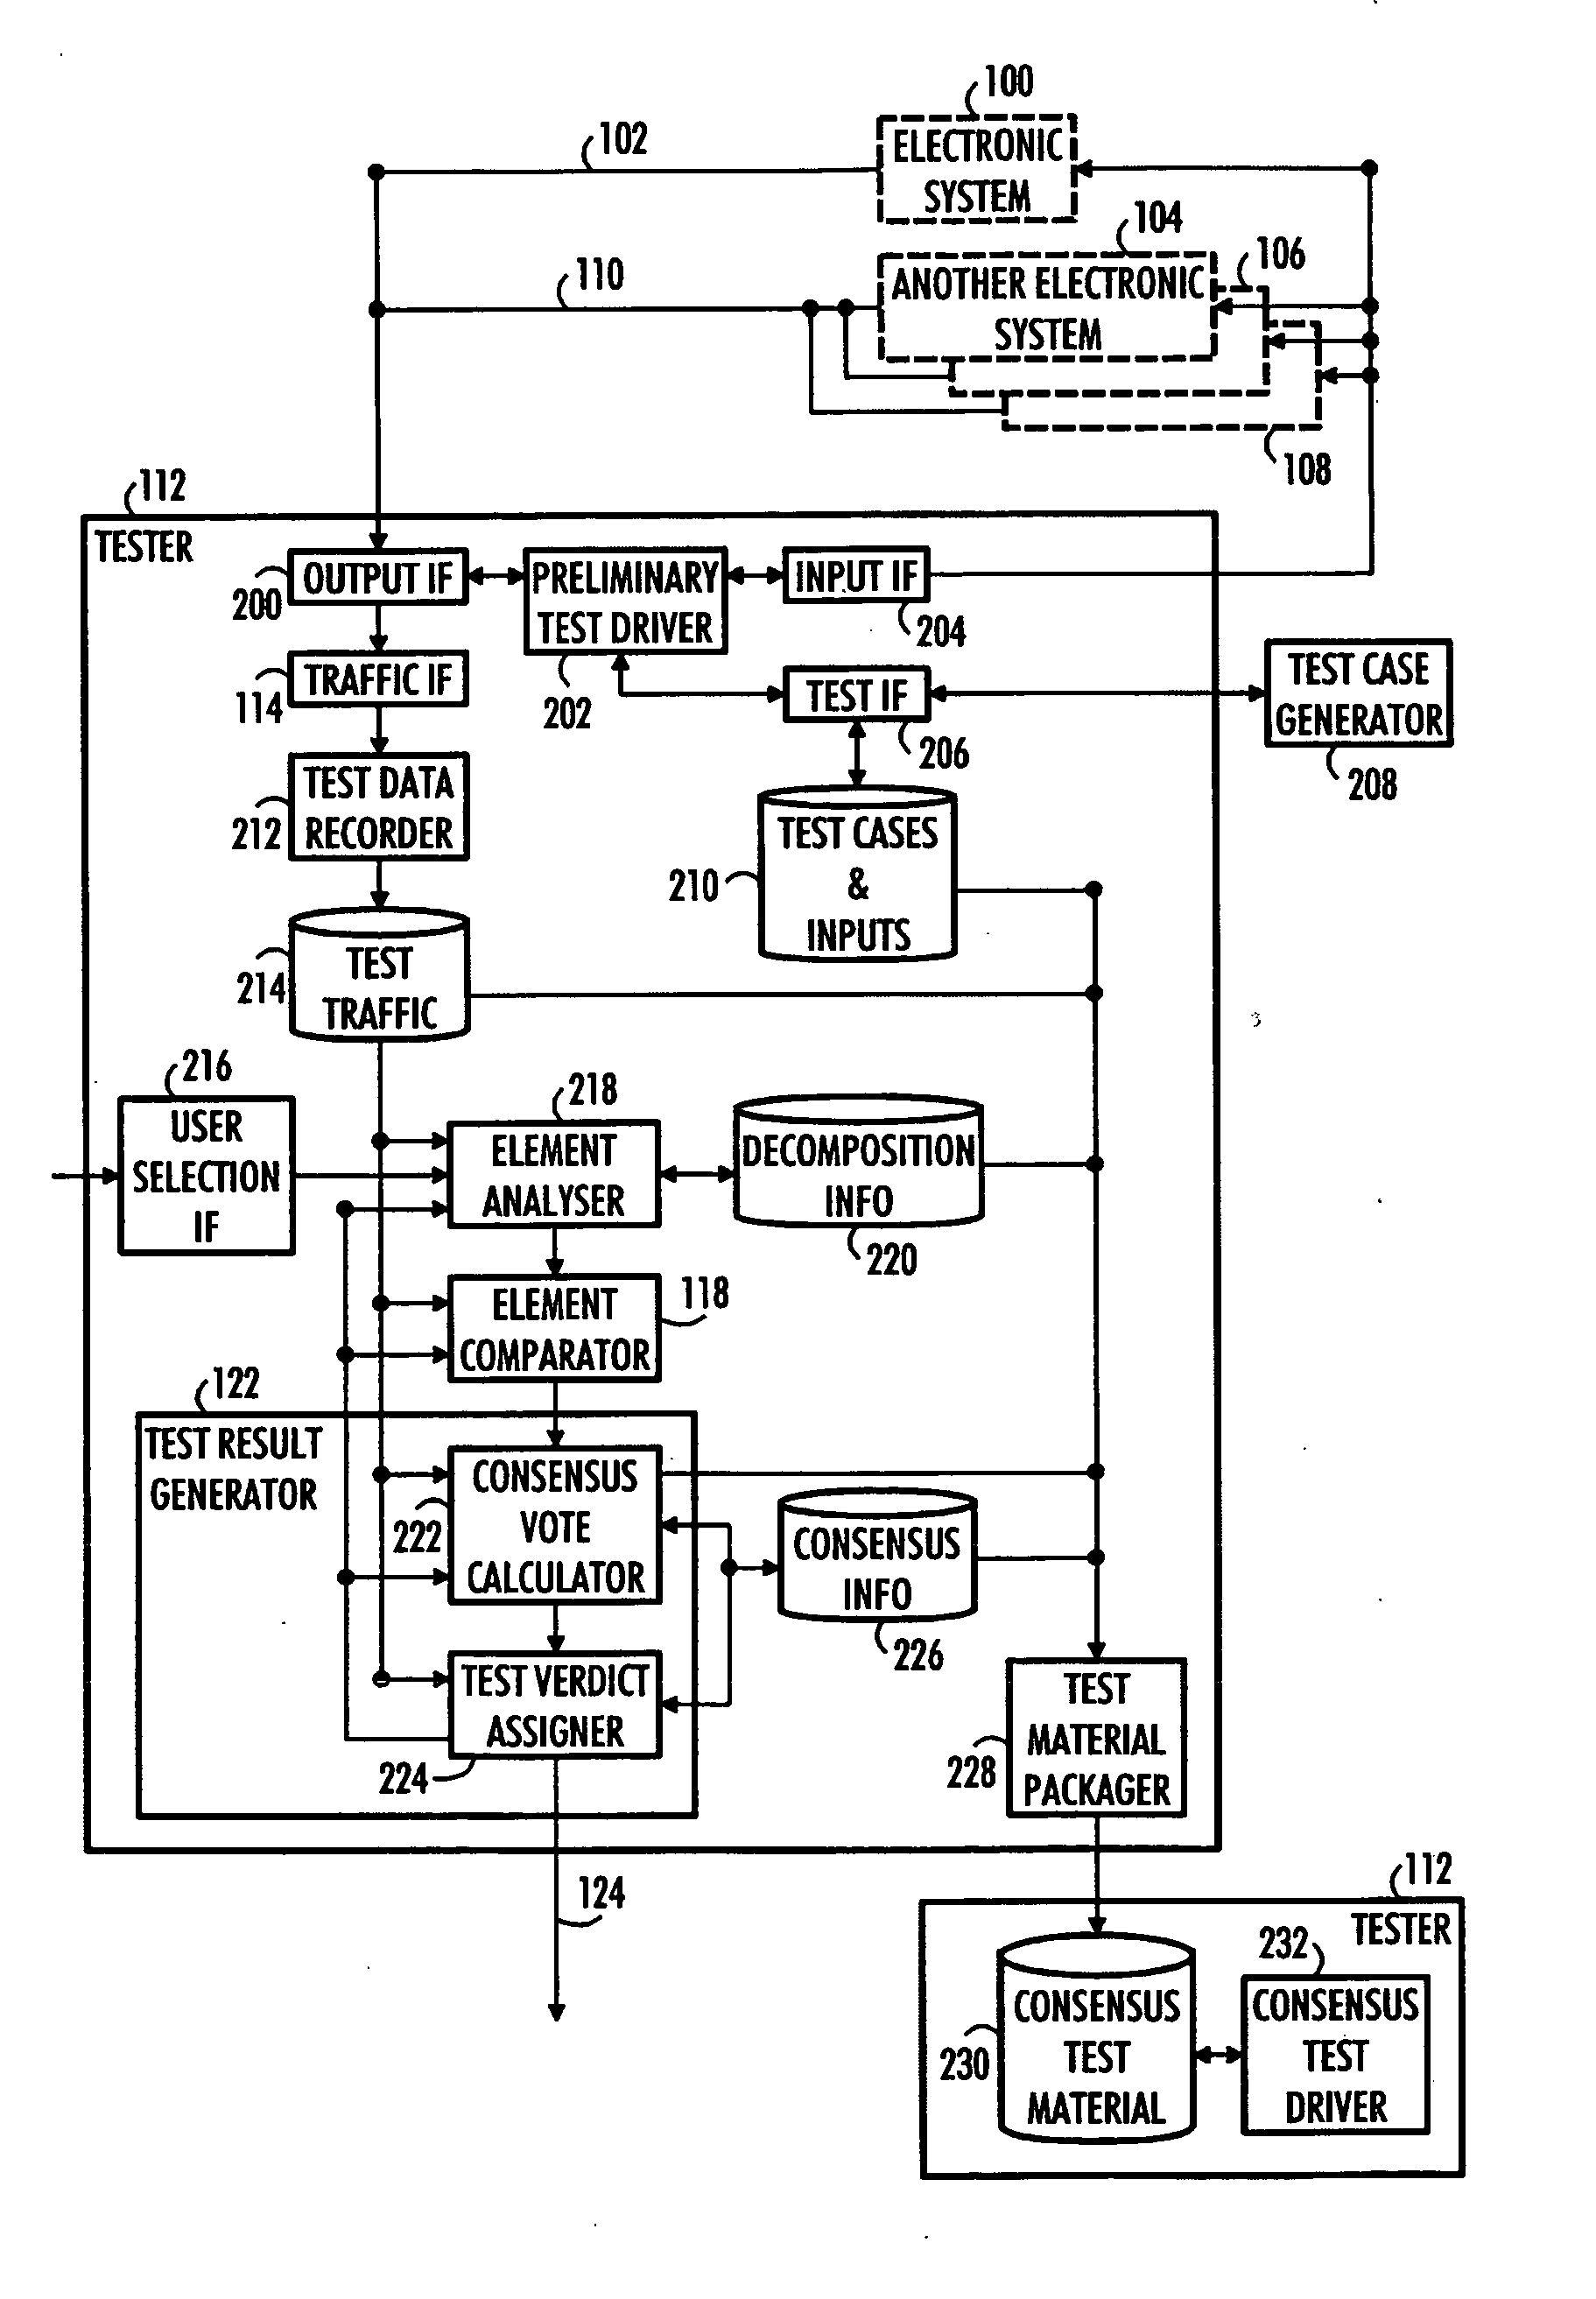 Consensus testing of electronic system